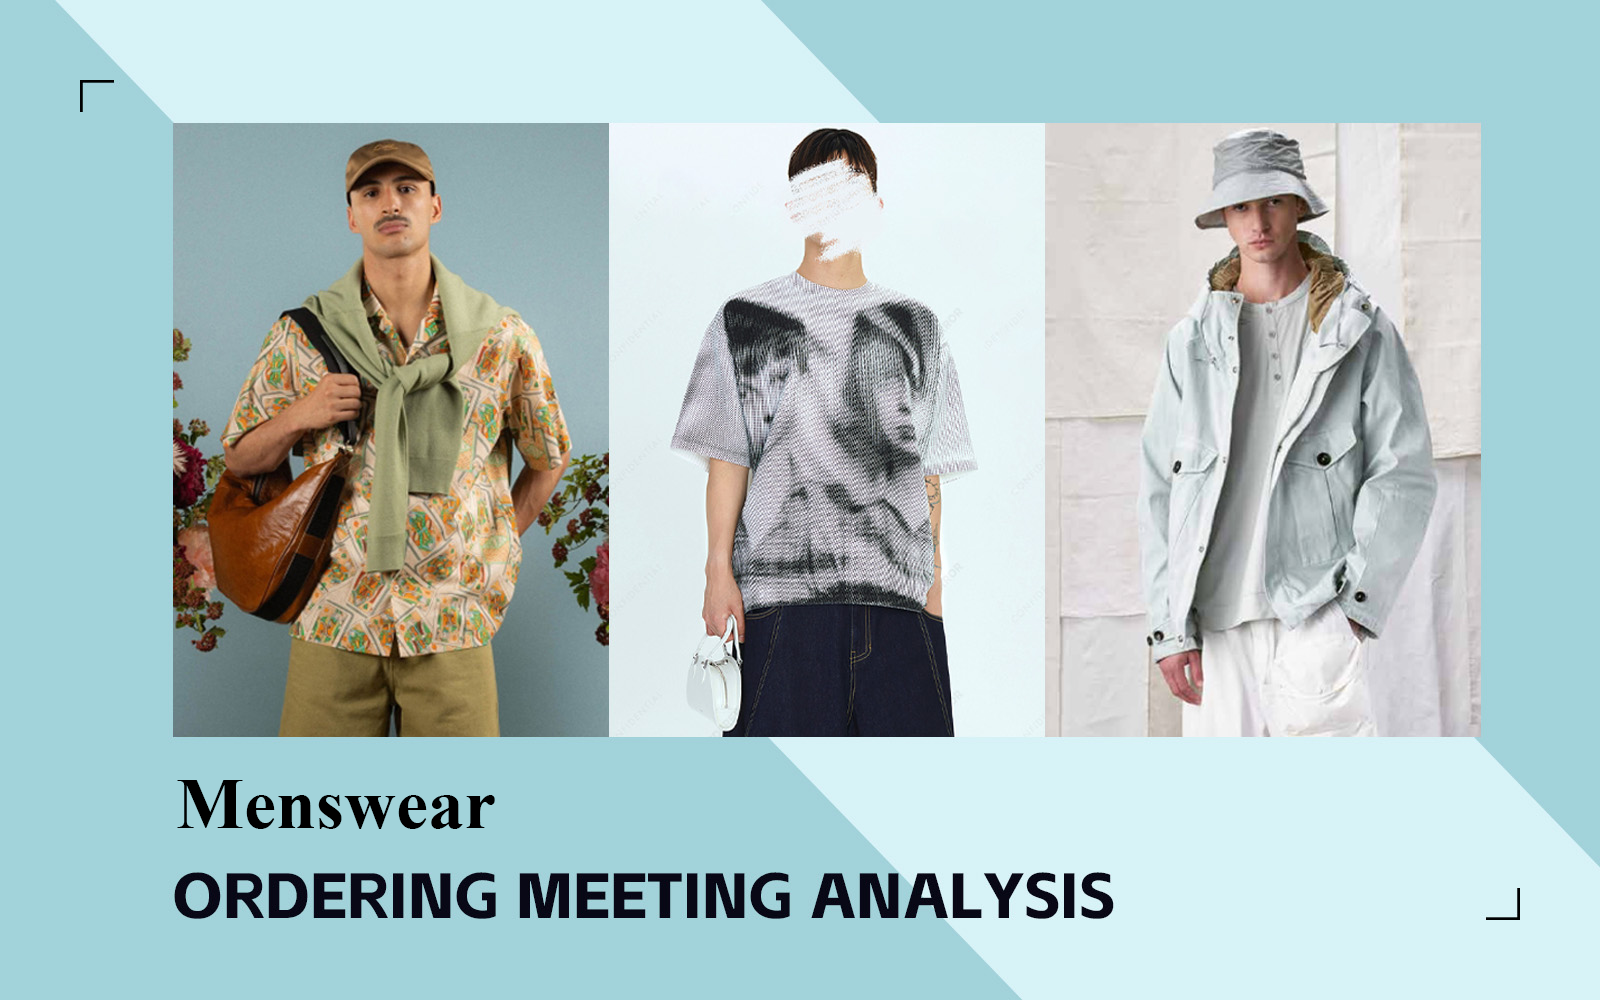 Playful Dressing -- The Comprehensive Analysis of Men's Ordering Meeting